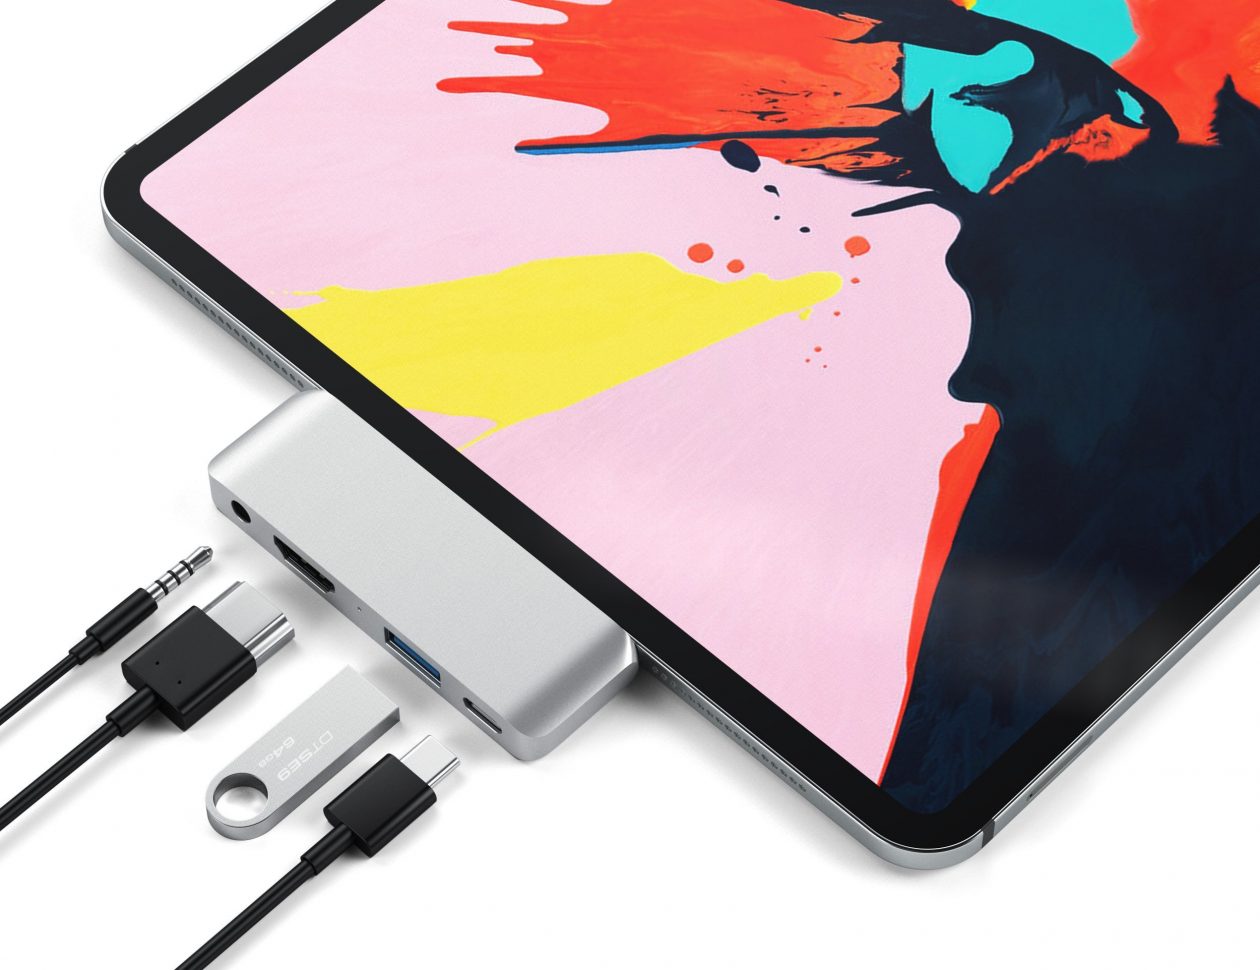 Satechi will also launch USB-C hub for the new iPad Pro